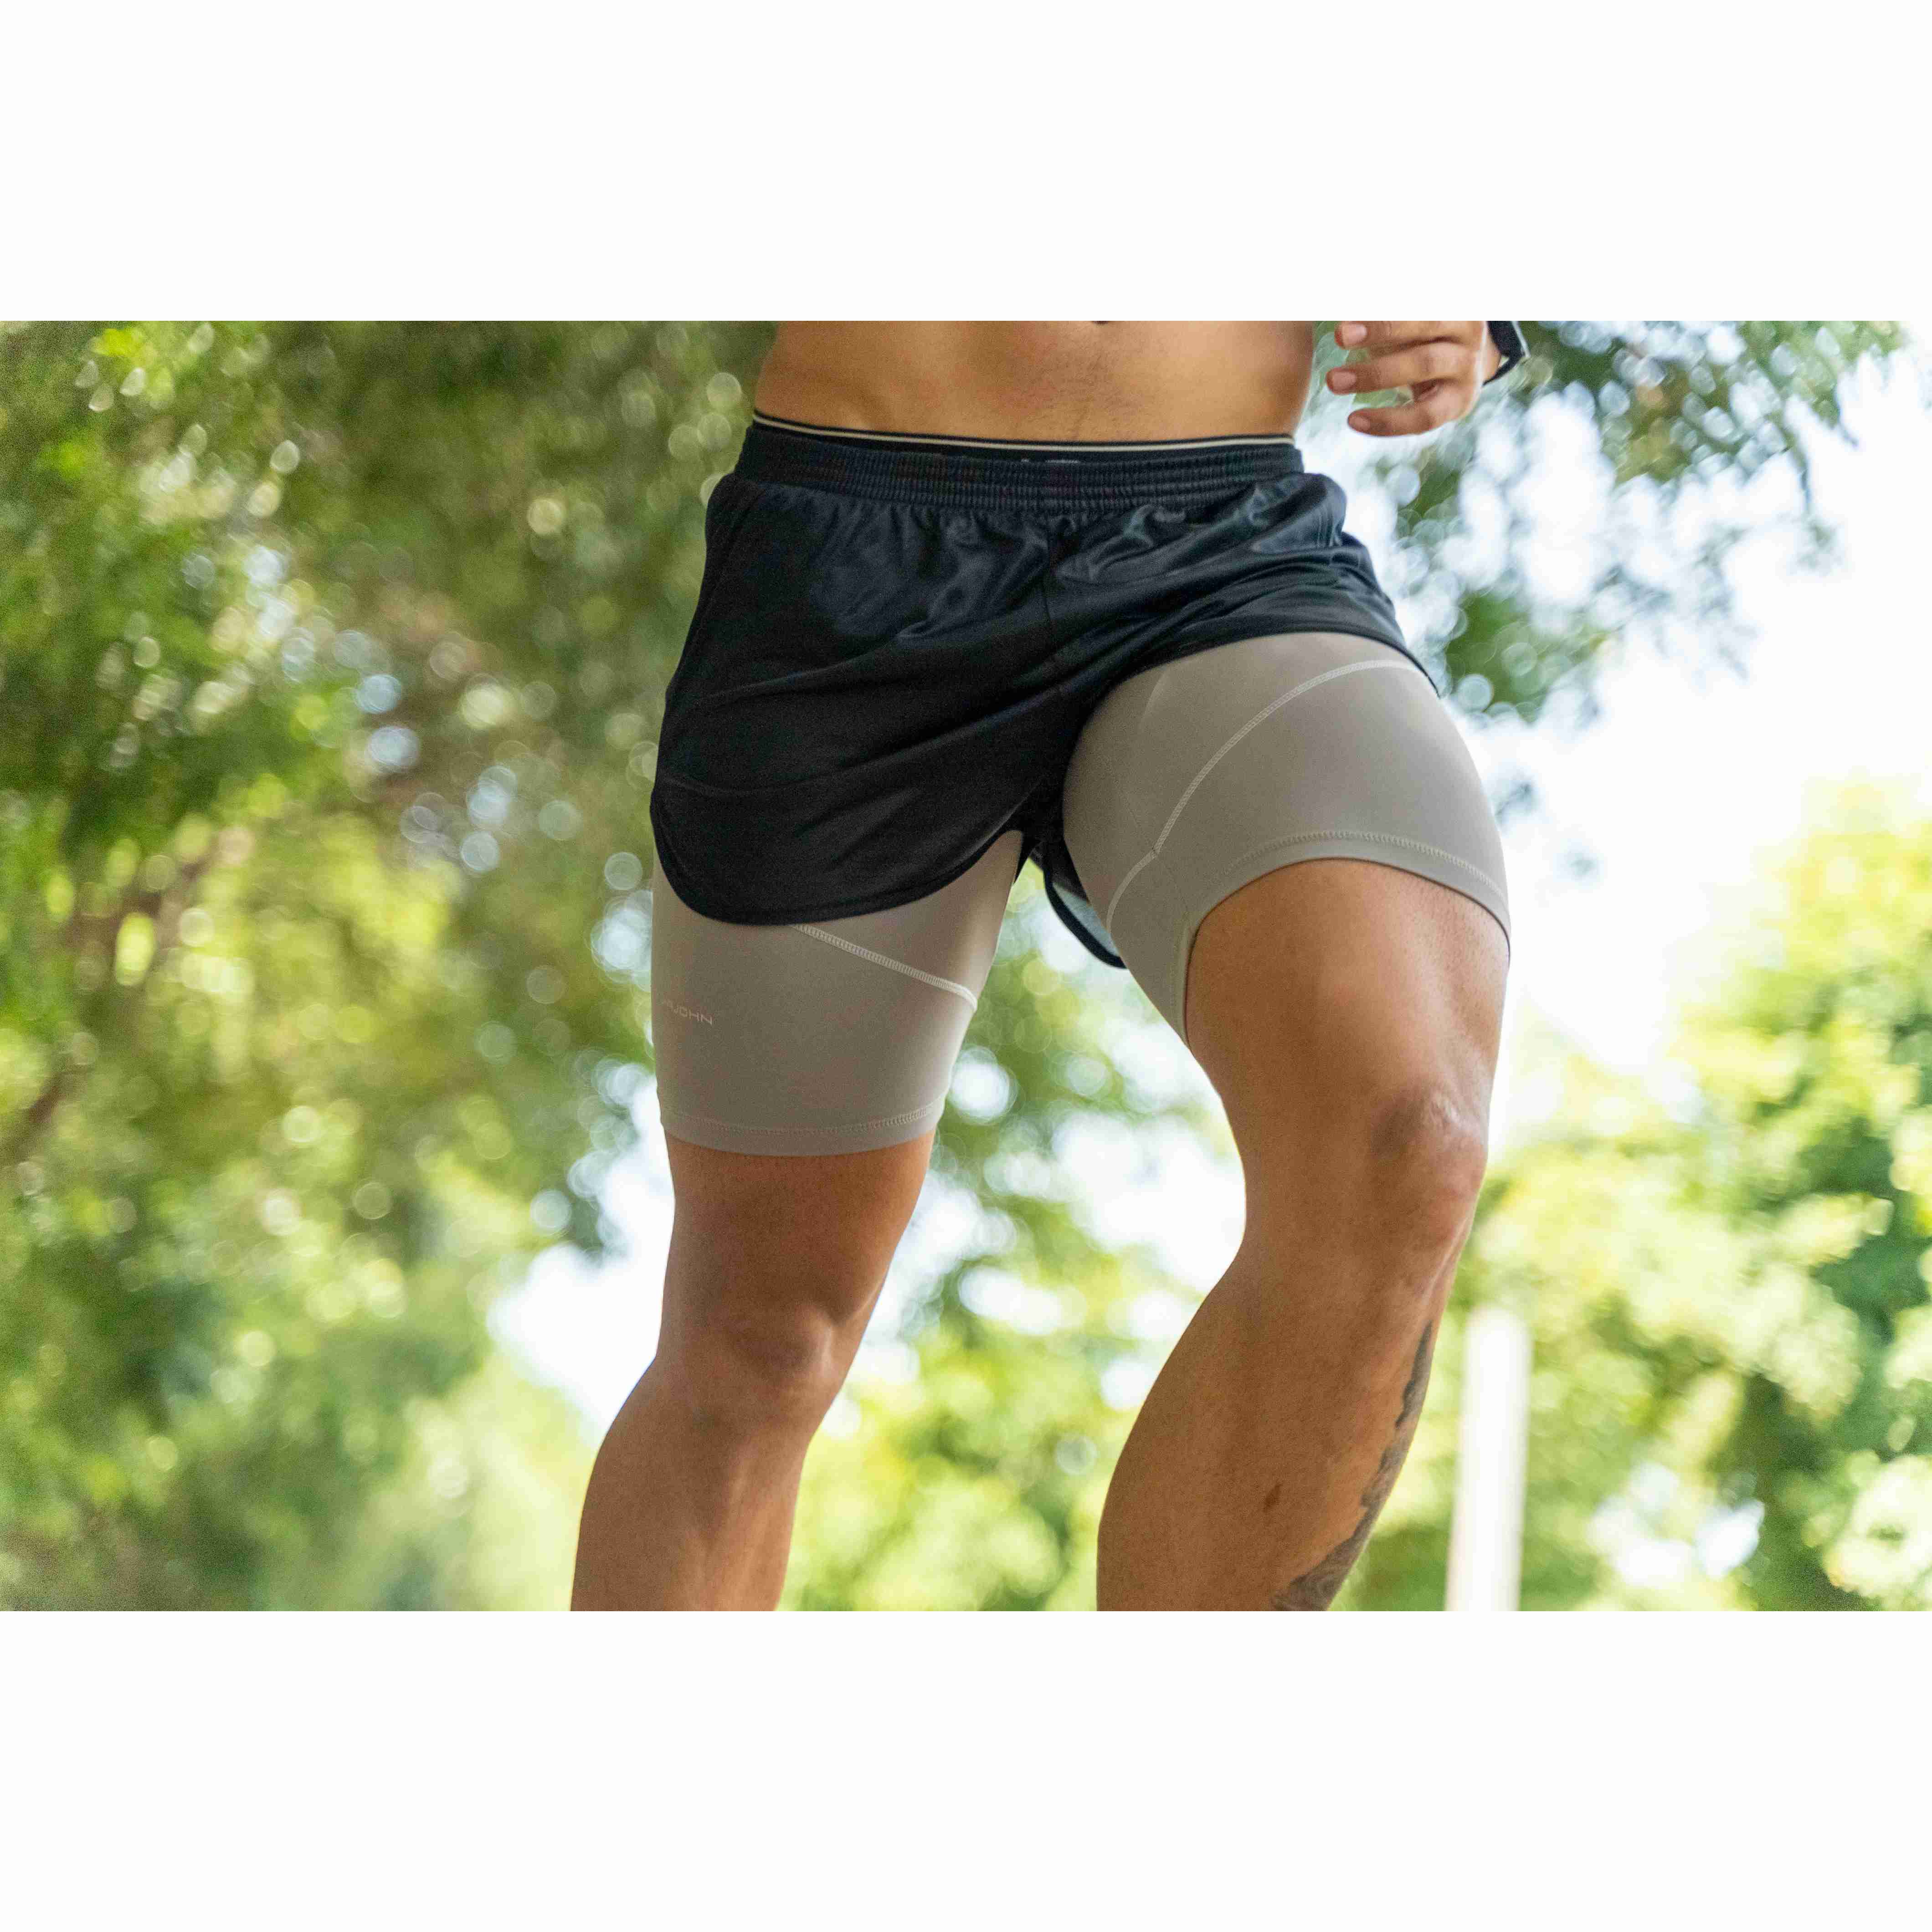 men-compression-shorts-with-pocket with discount code